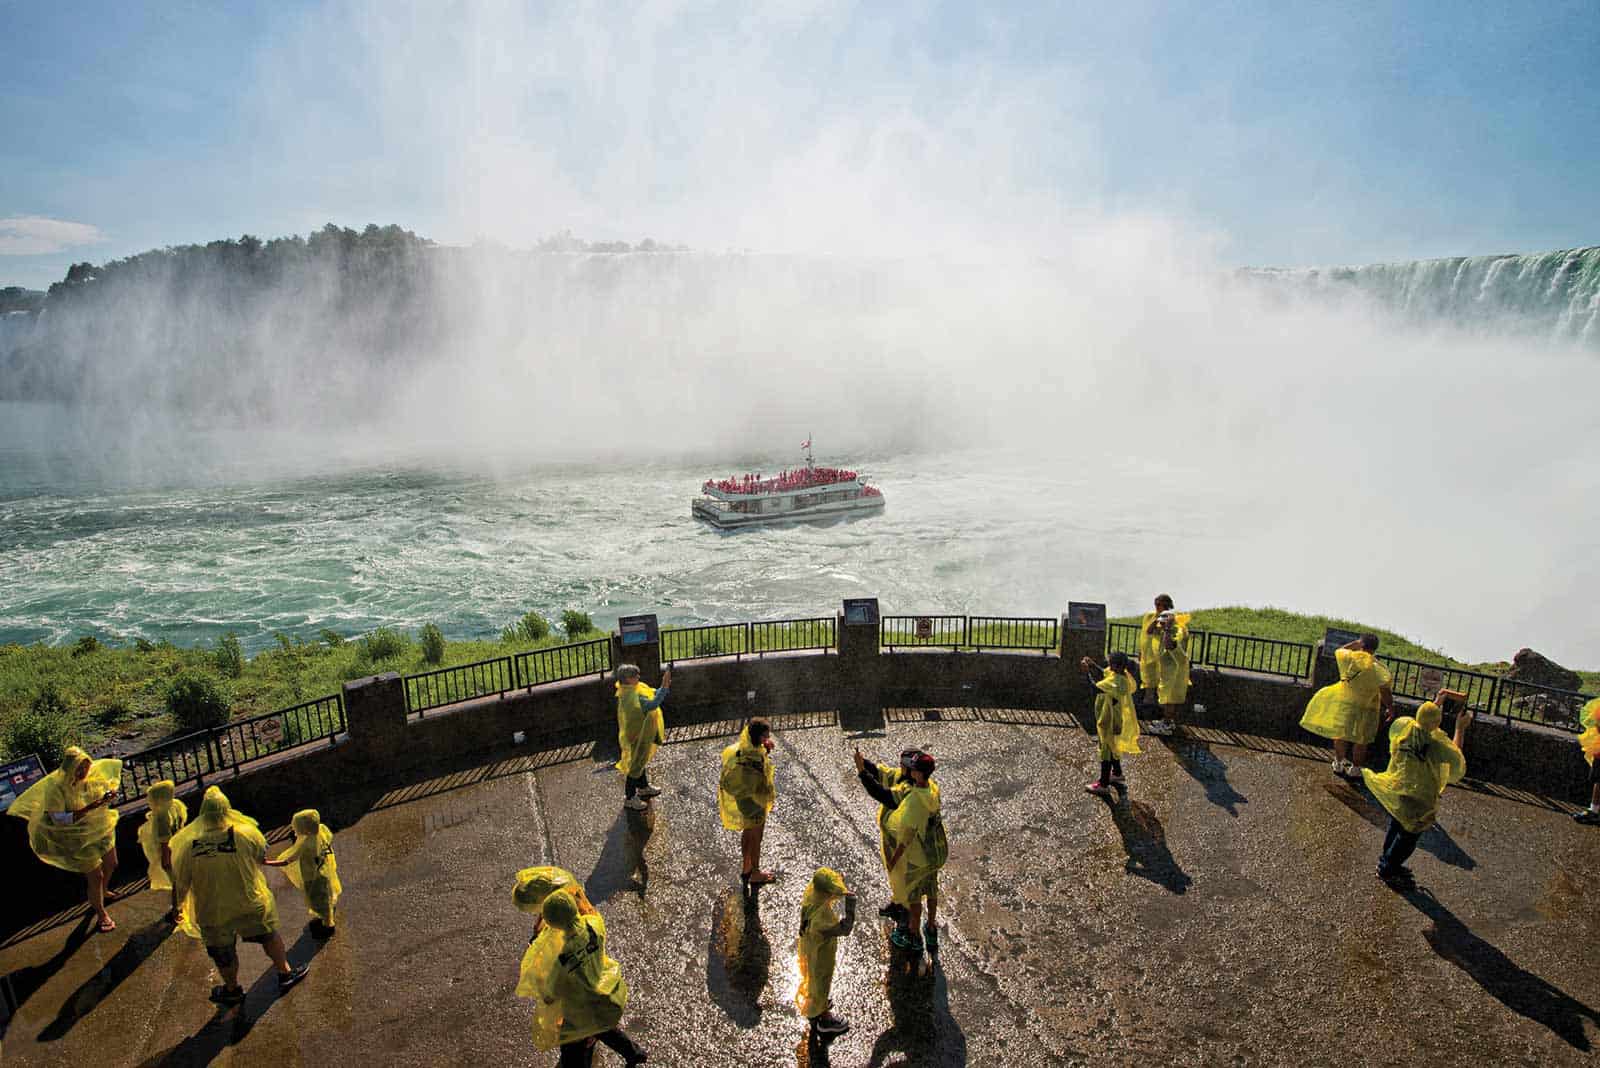 View of the falls. There is mist coming out and a boat in the middle of the lake. There is an observation deck with people wearing yellow ponchos, a lot of them taking pictures